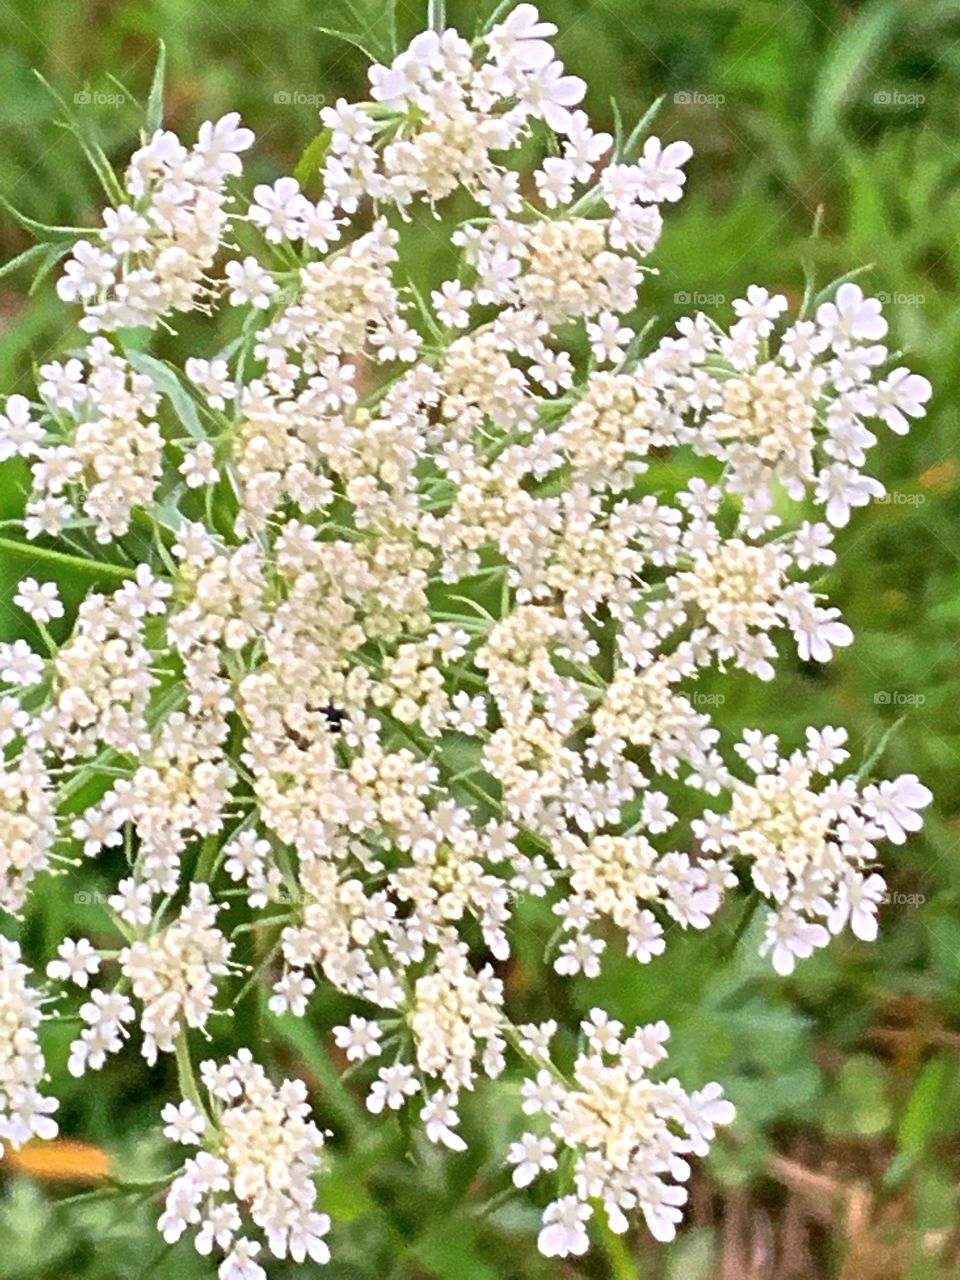 Queen Anne’s Lace